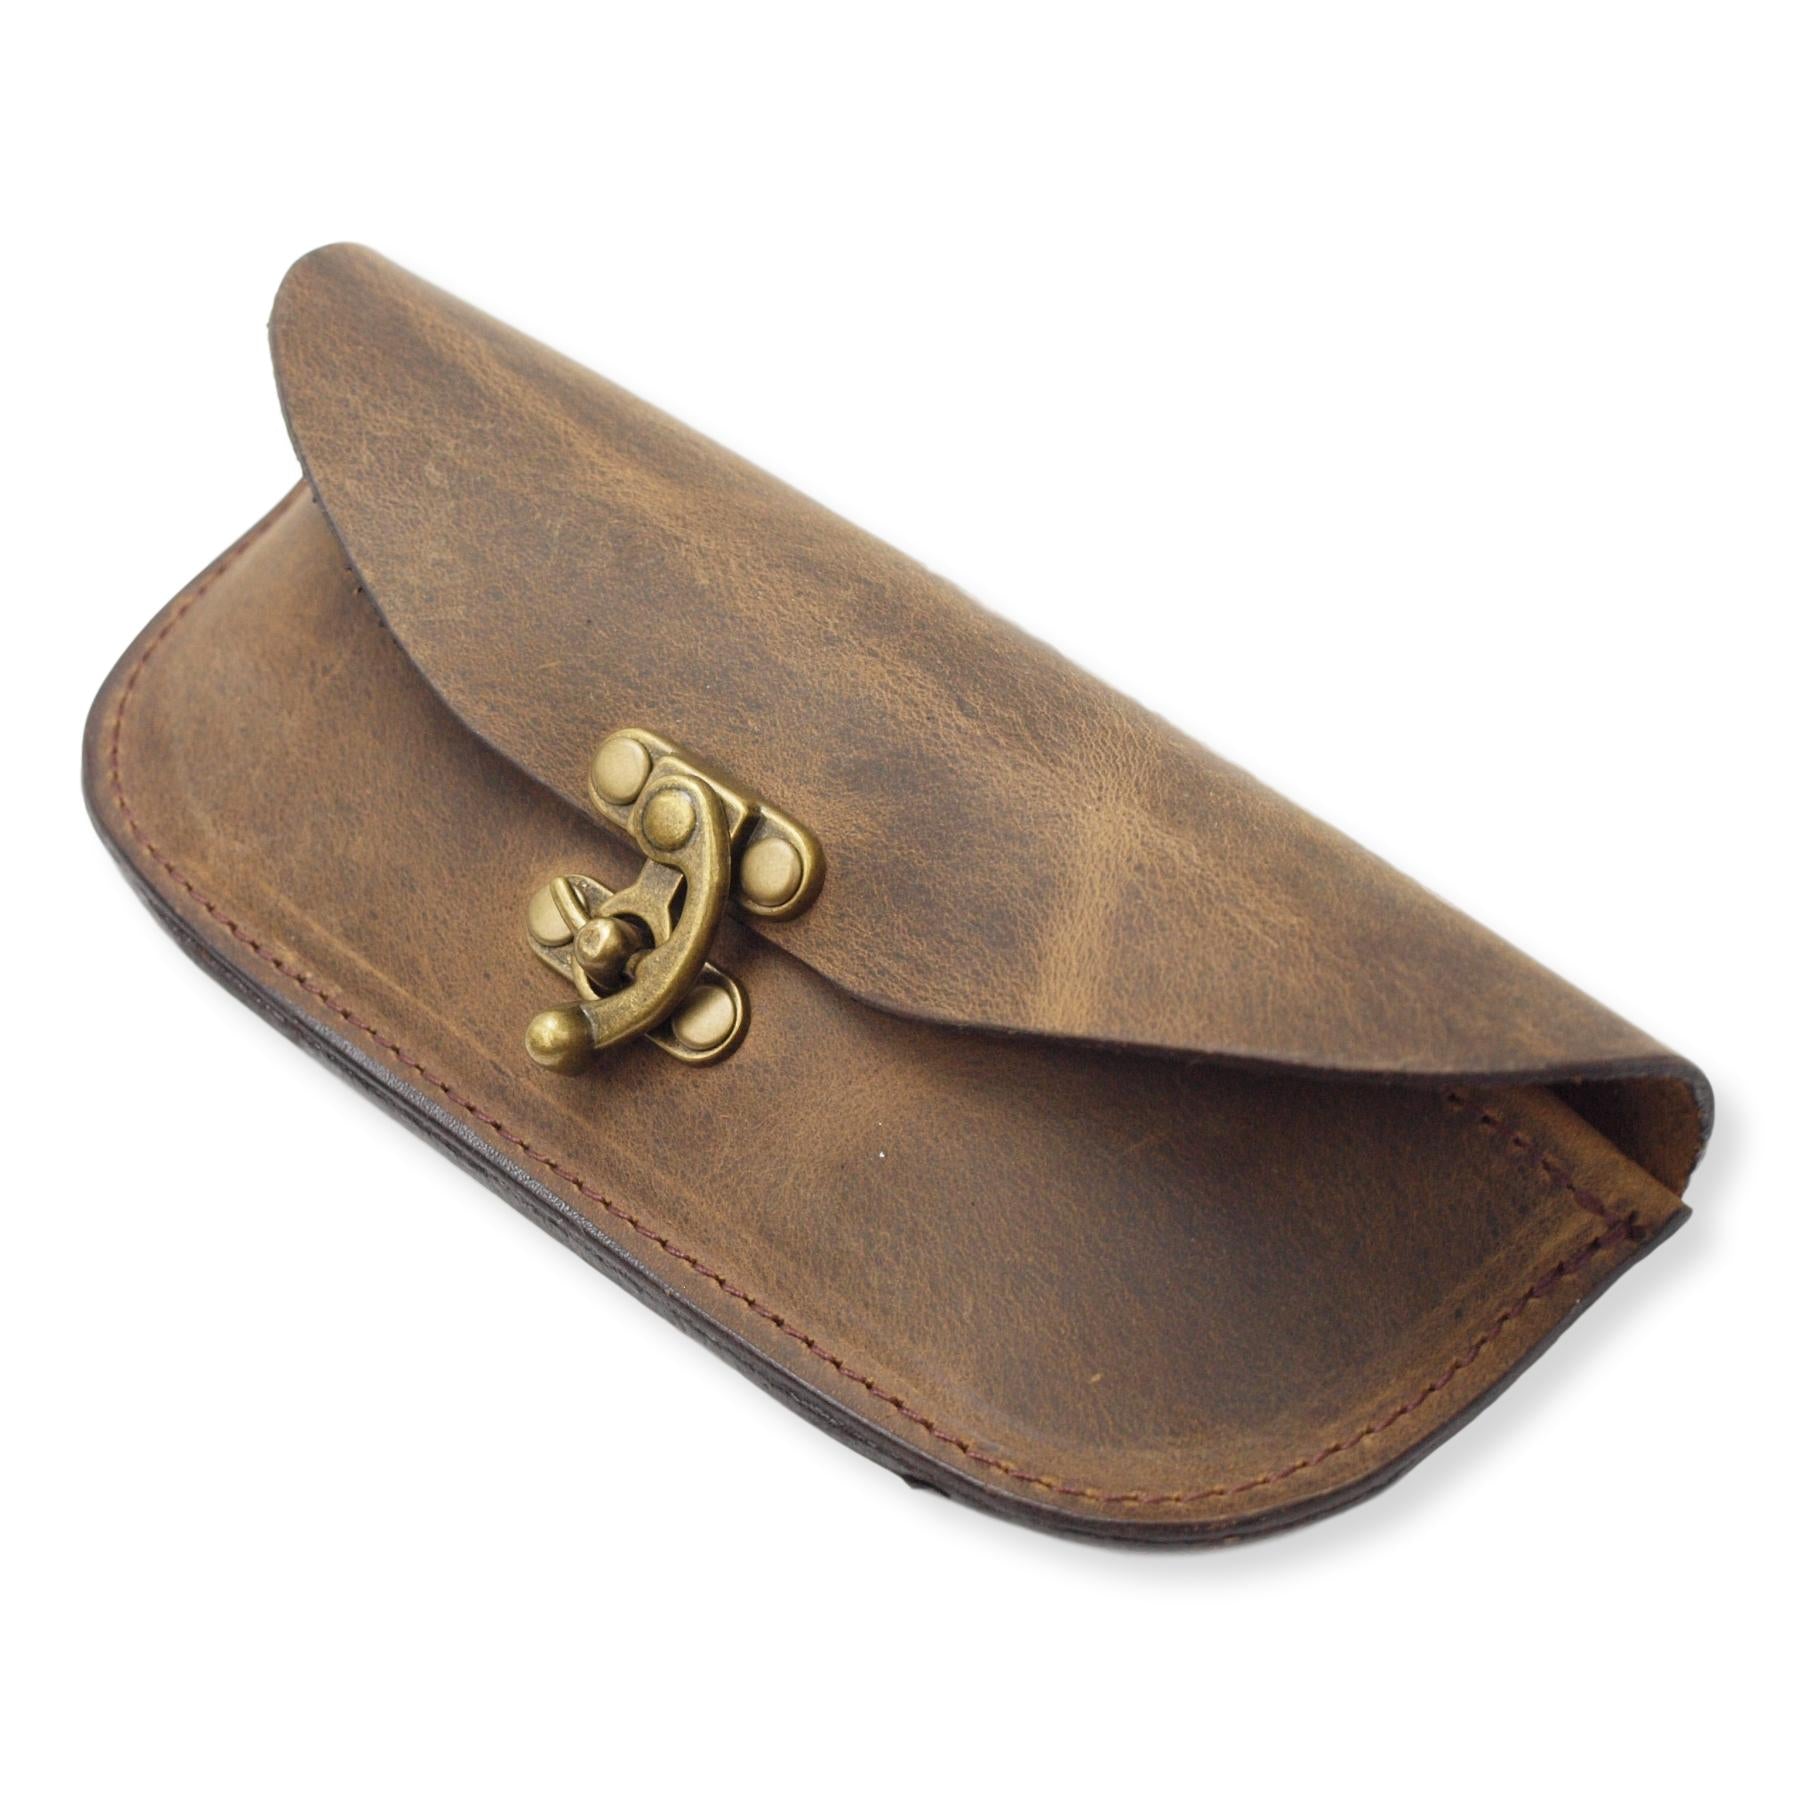 Personalized Leather Glasses Case in Distressed Brown, Monogrammed